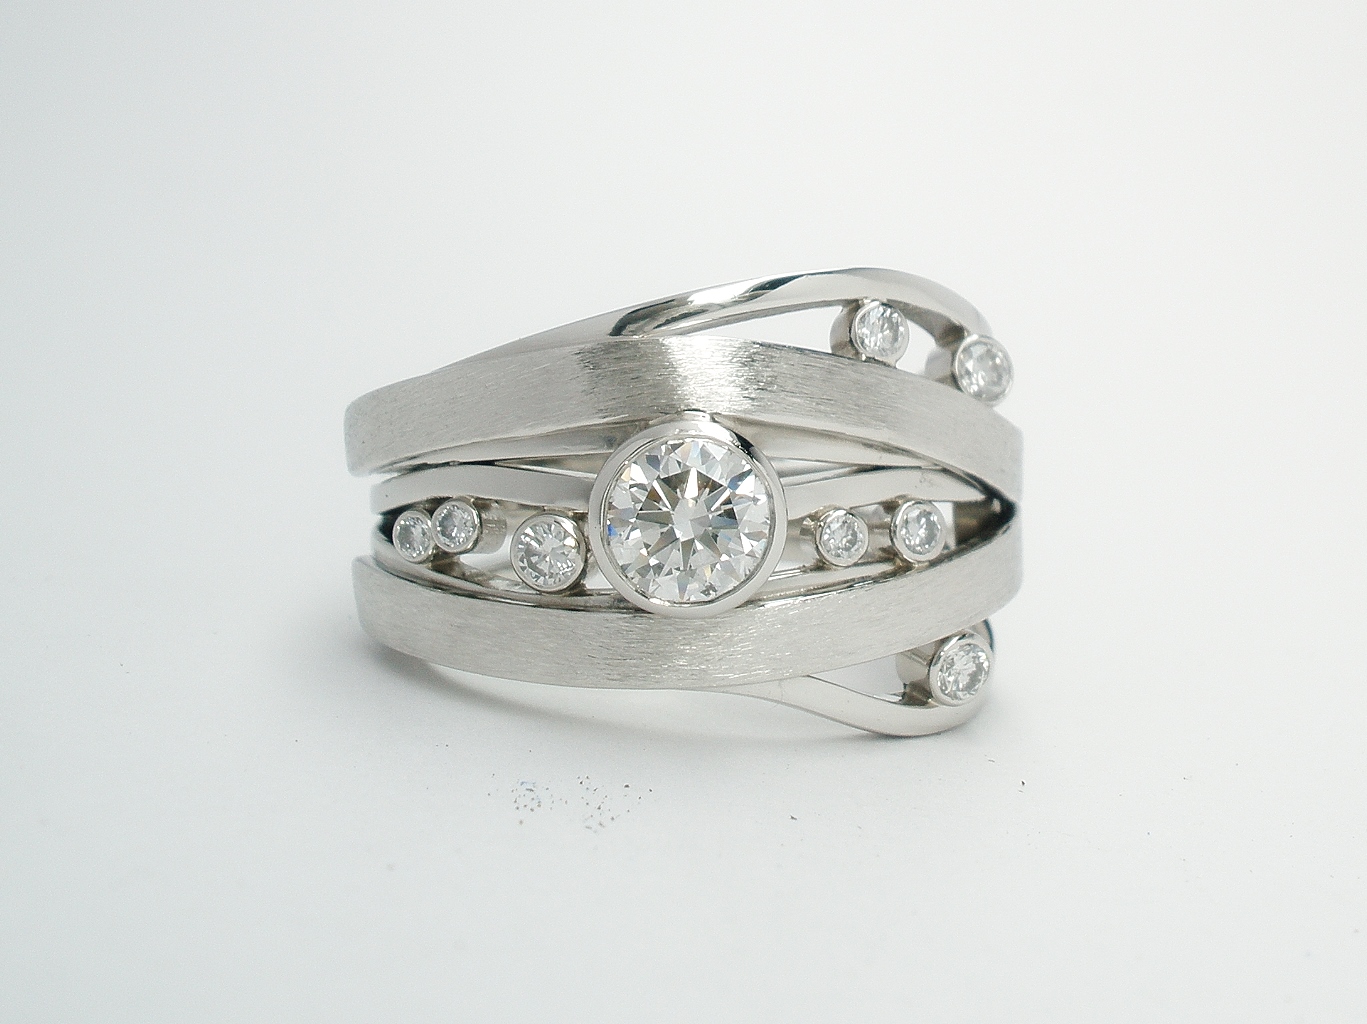 A 9 stone round brilliant cut diamond ring mounted in platinum. The ring consists of five 1mm broad bands that meander around with 2 straps overlayed. The main centre diamond is rub-over set in a raised setting with the 8 smaller diamonds rub-over set low between the 1mm bands.